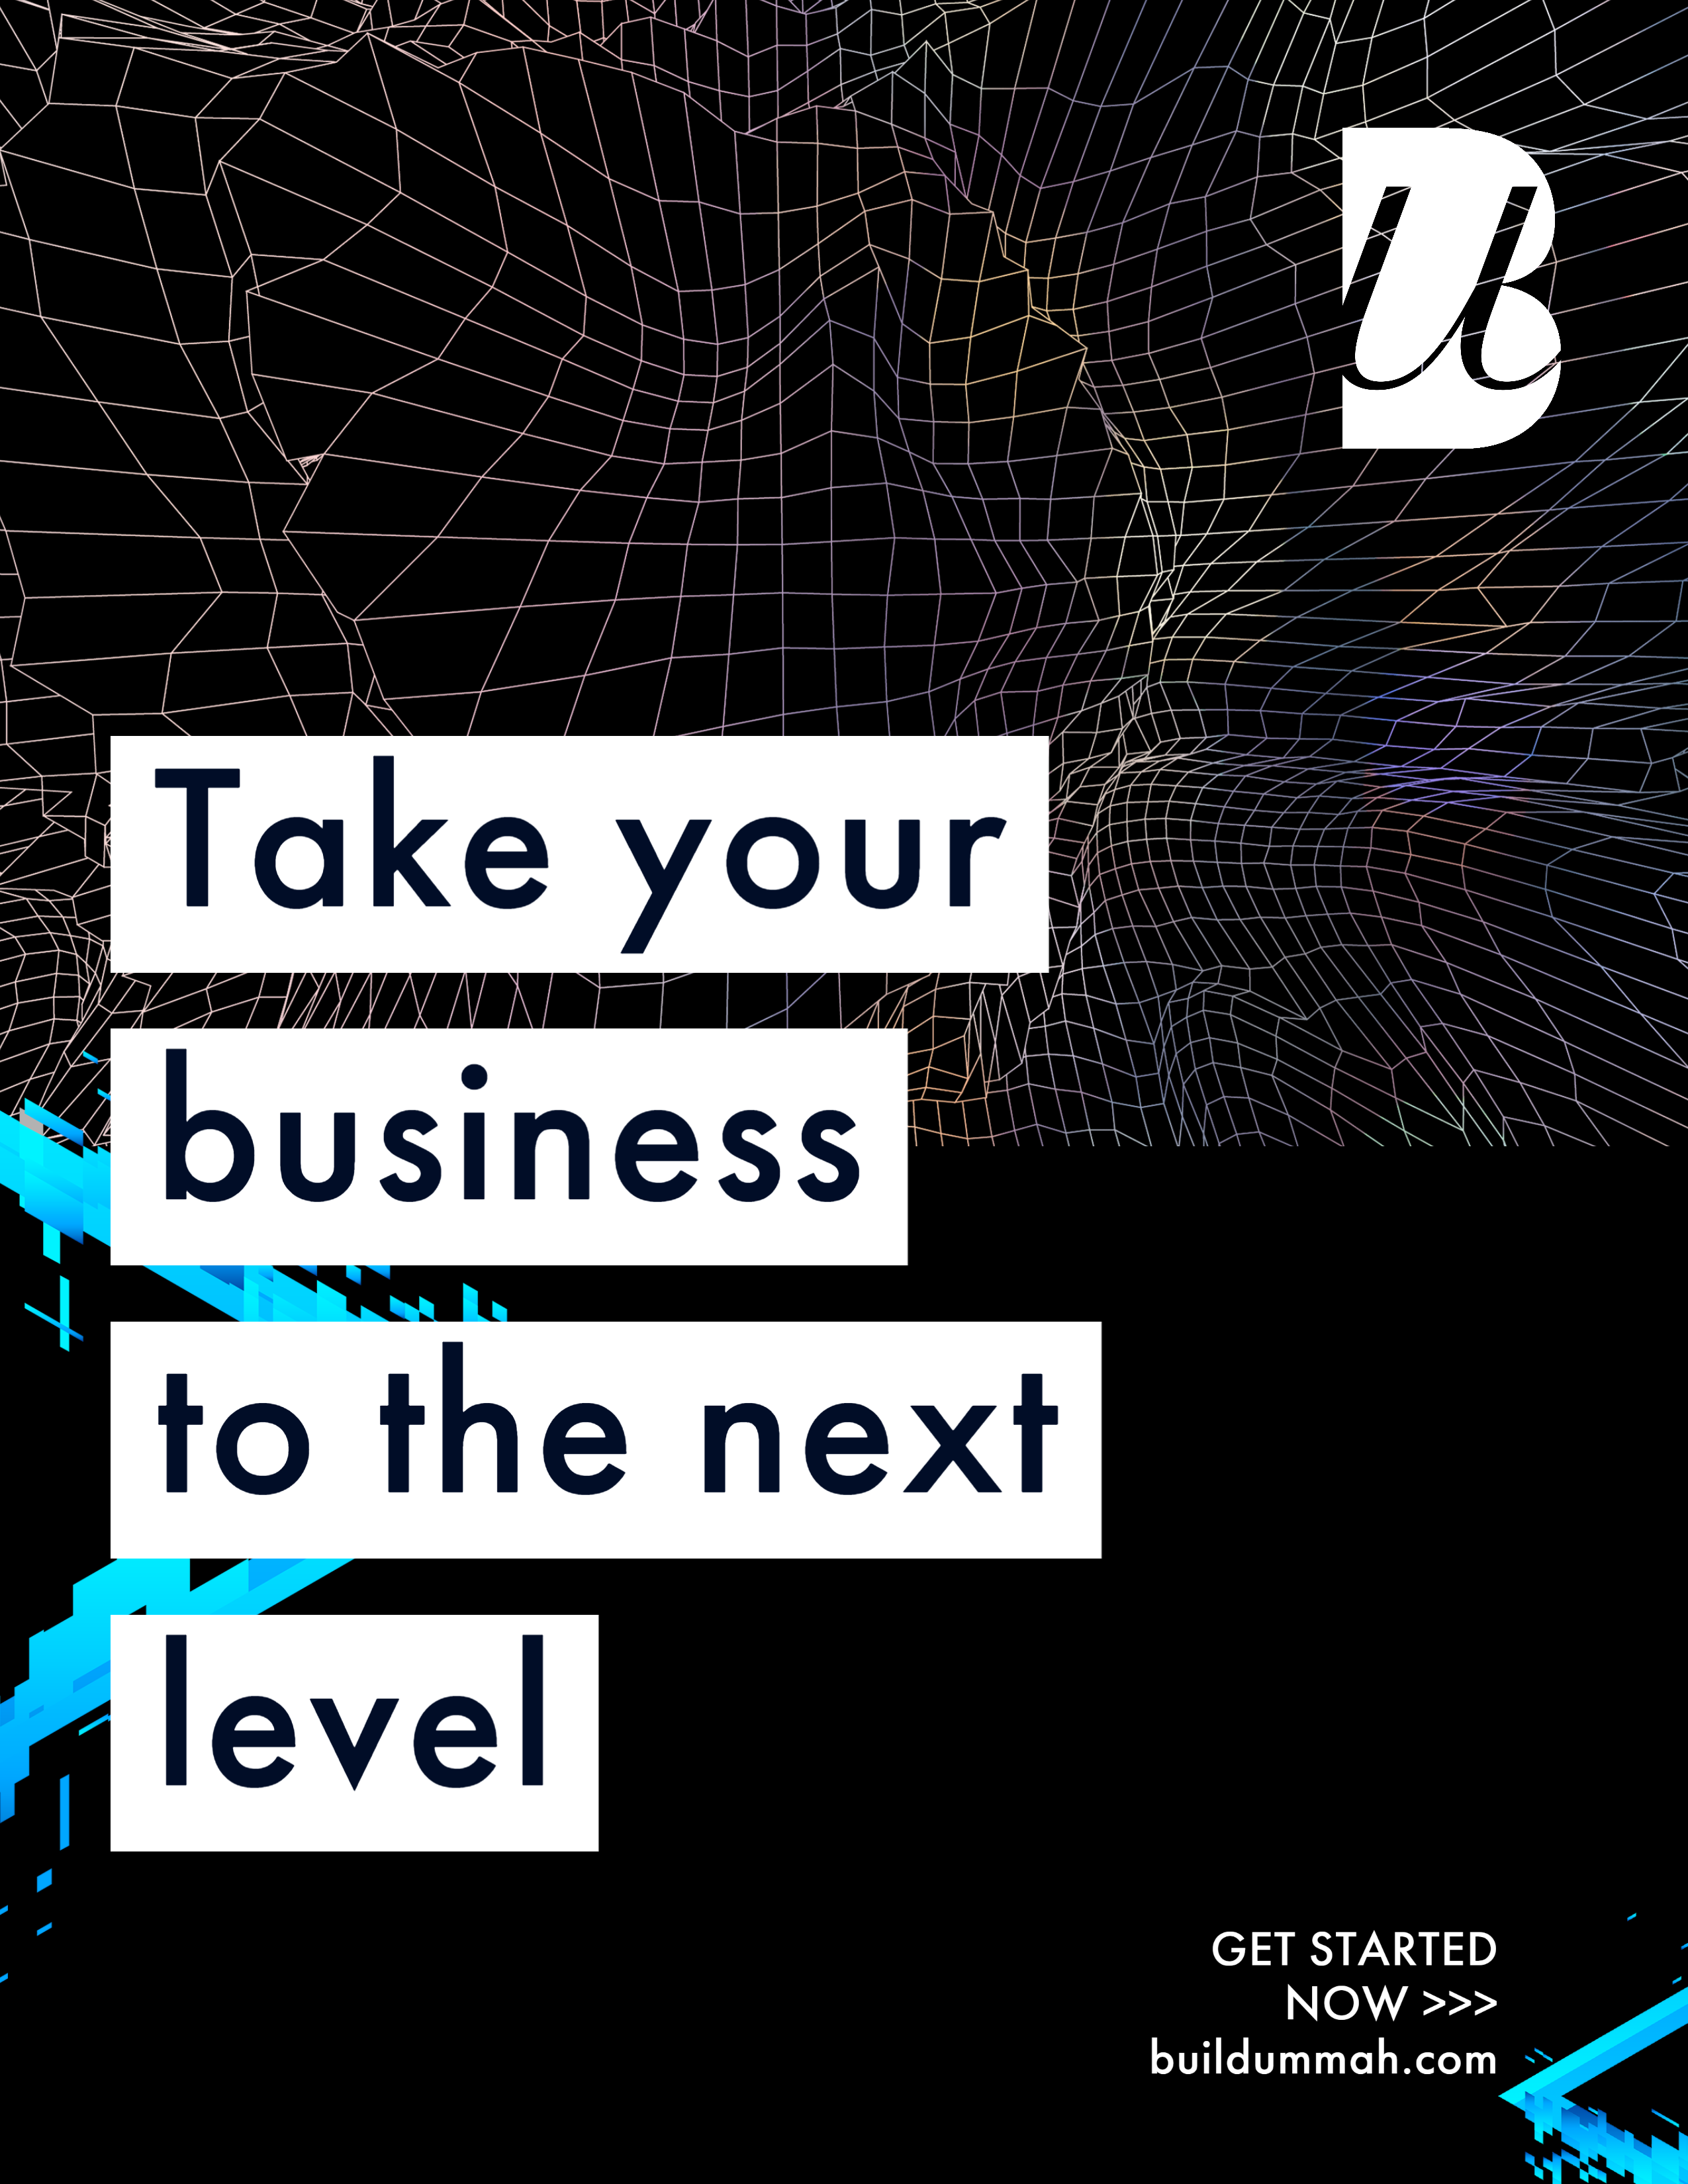 Take your business to the next level